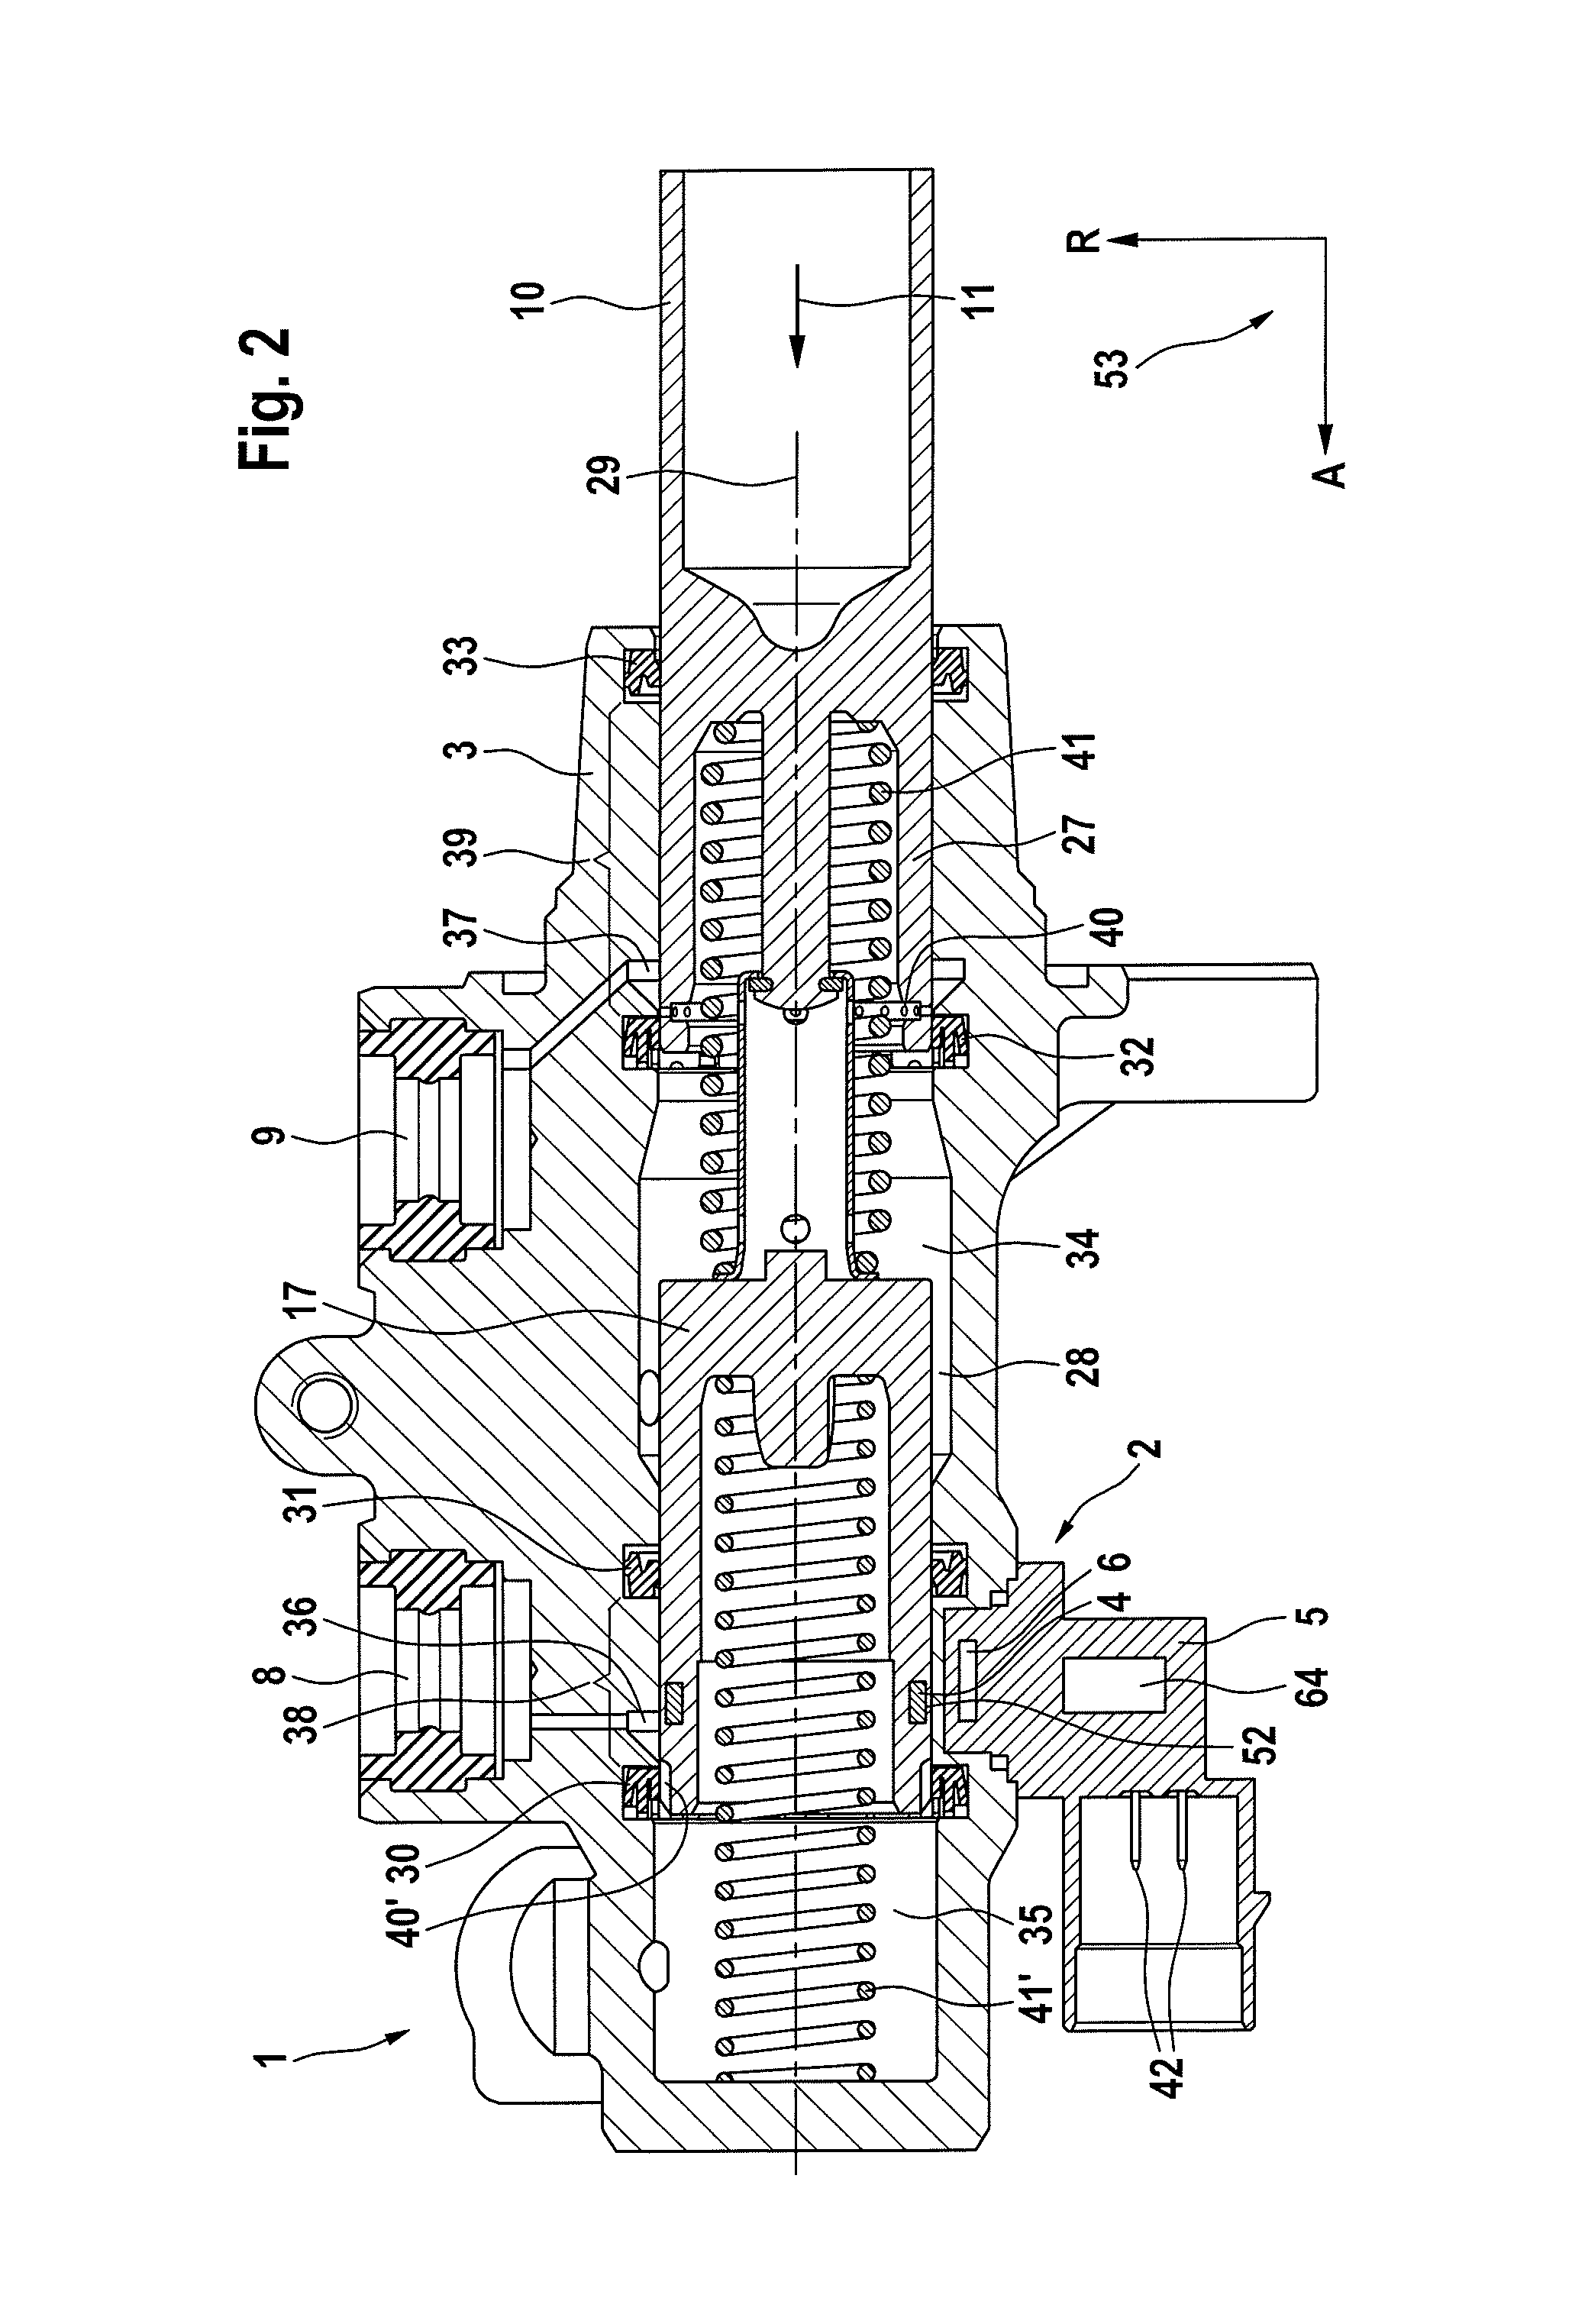 Main brake cylinder having a device for the contactless monitoring of the position and movement of a linearly movable piston